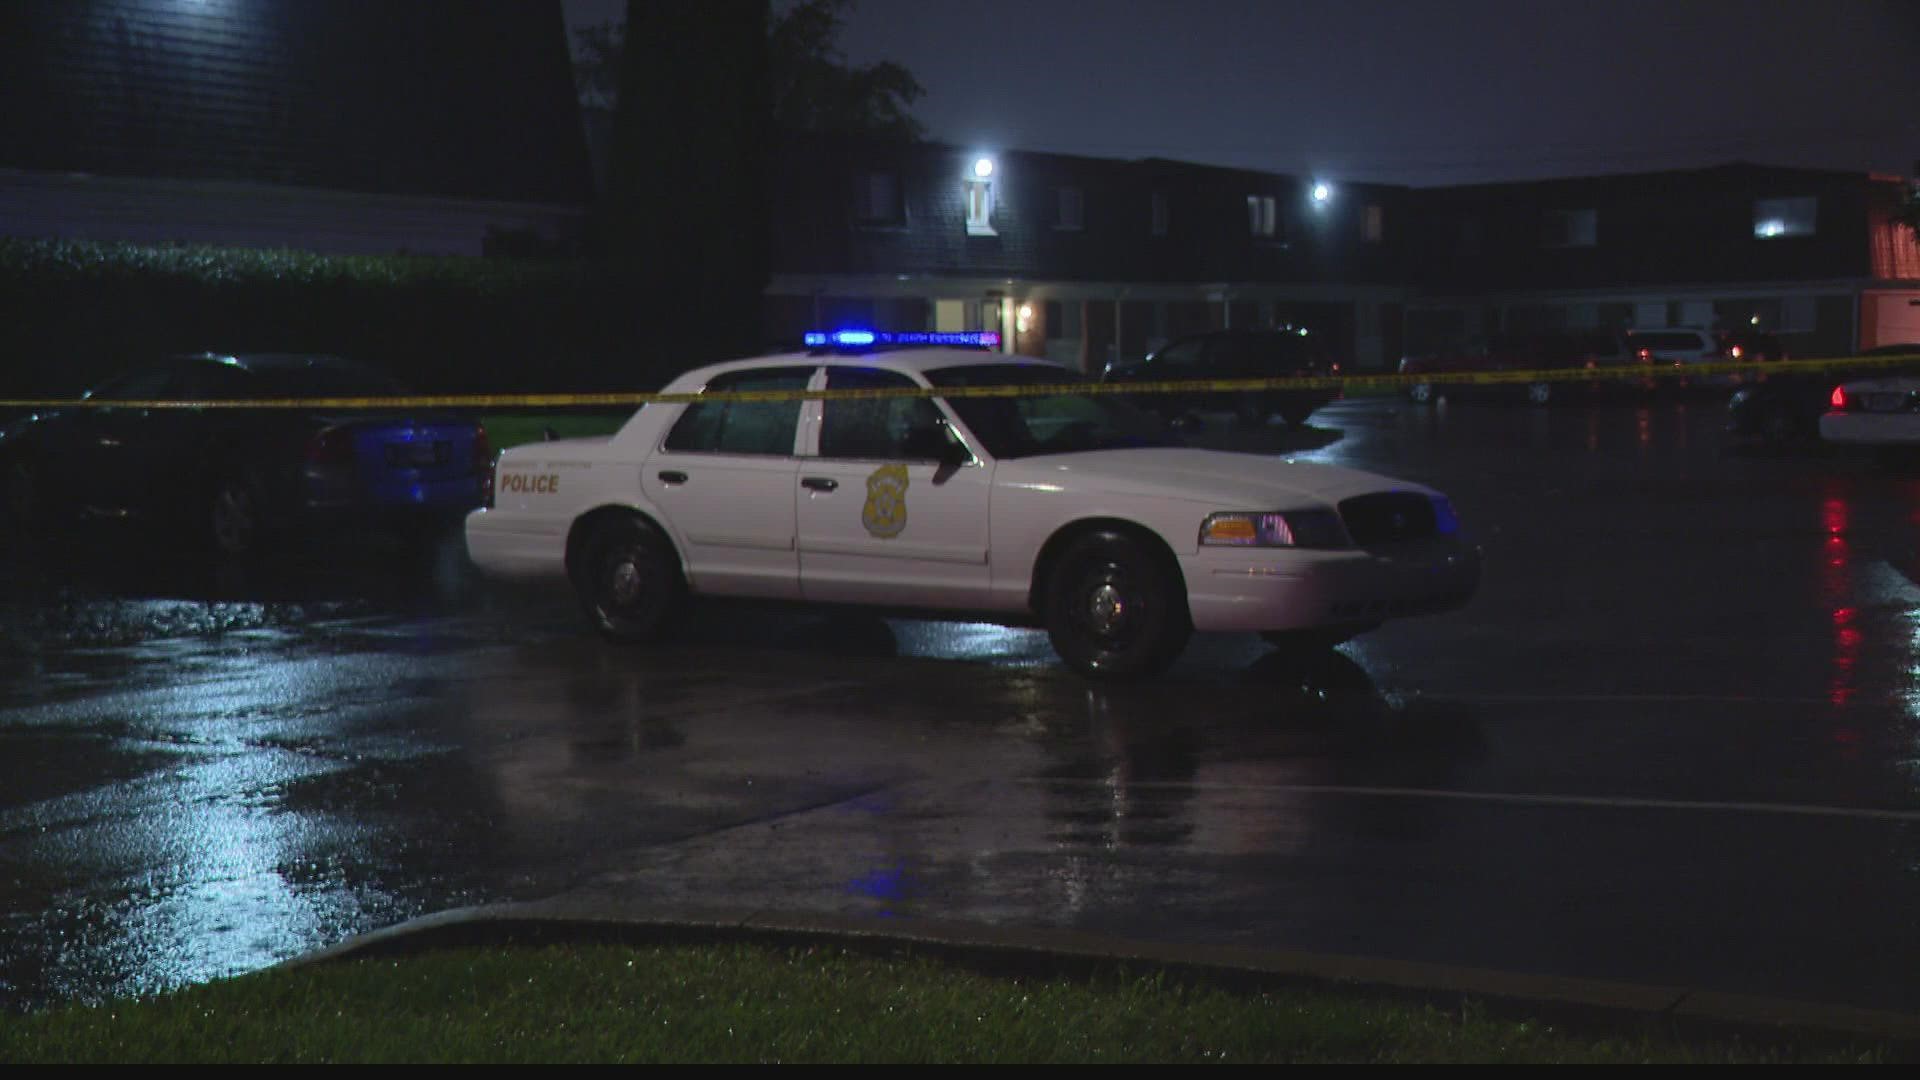 Officers were called to the Arborcrest Apartments near 38th Street and Post Road Friday night and found two people shot.